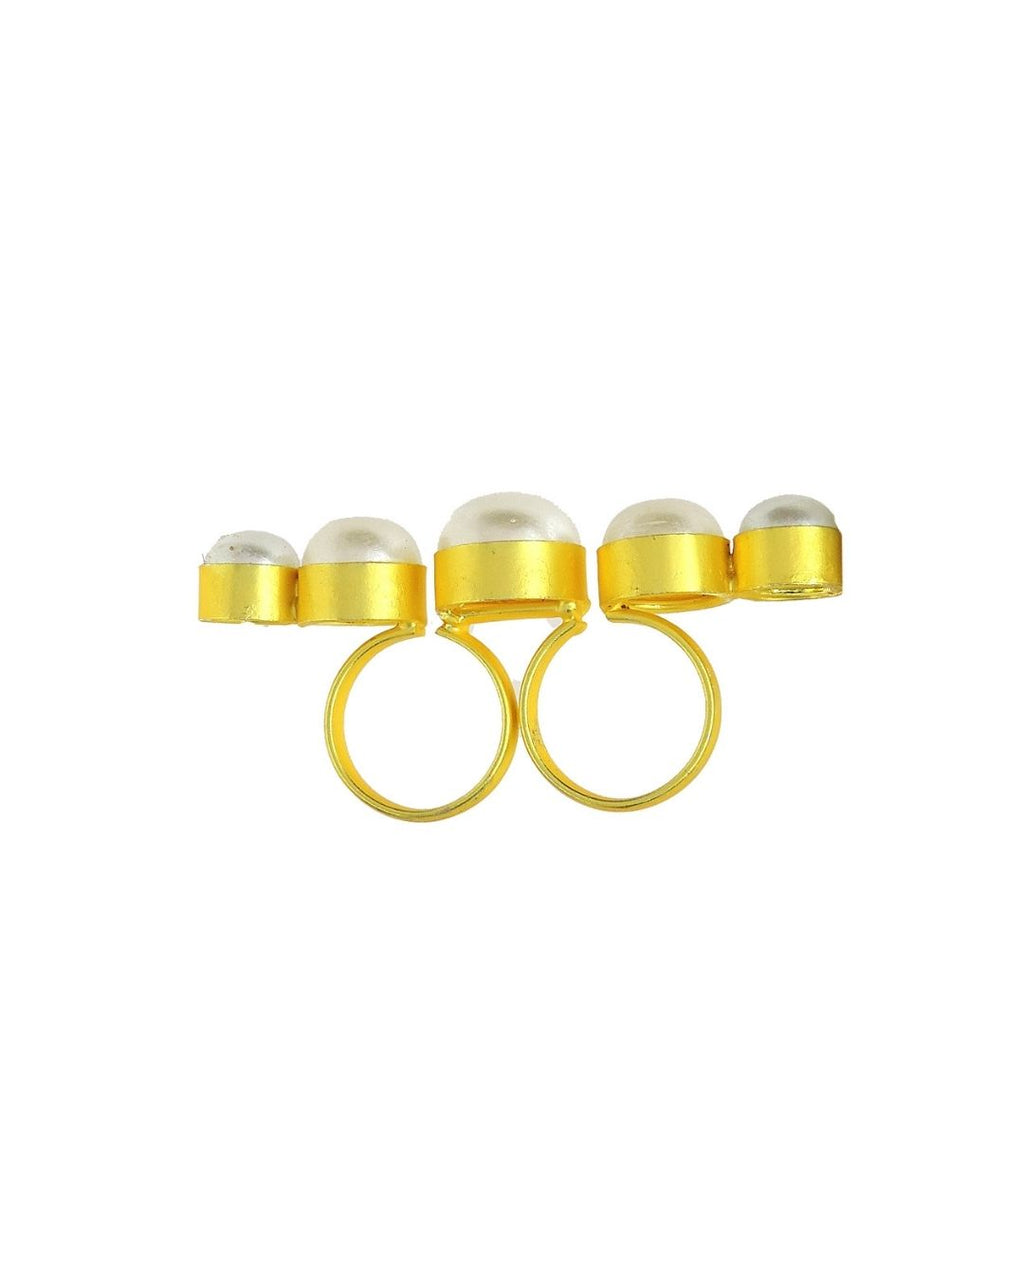 Layla Pearl Ring - Rings - Handcrafted Jewellery - Made in India - Dubai Jewellery, Fashion & Lifestyle - Dori